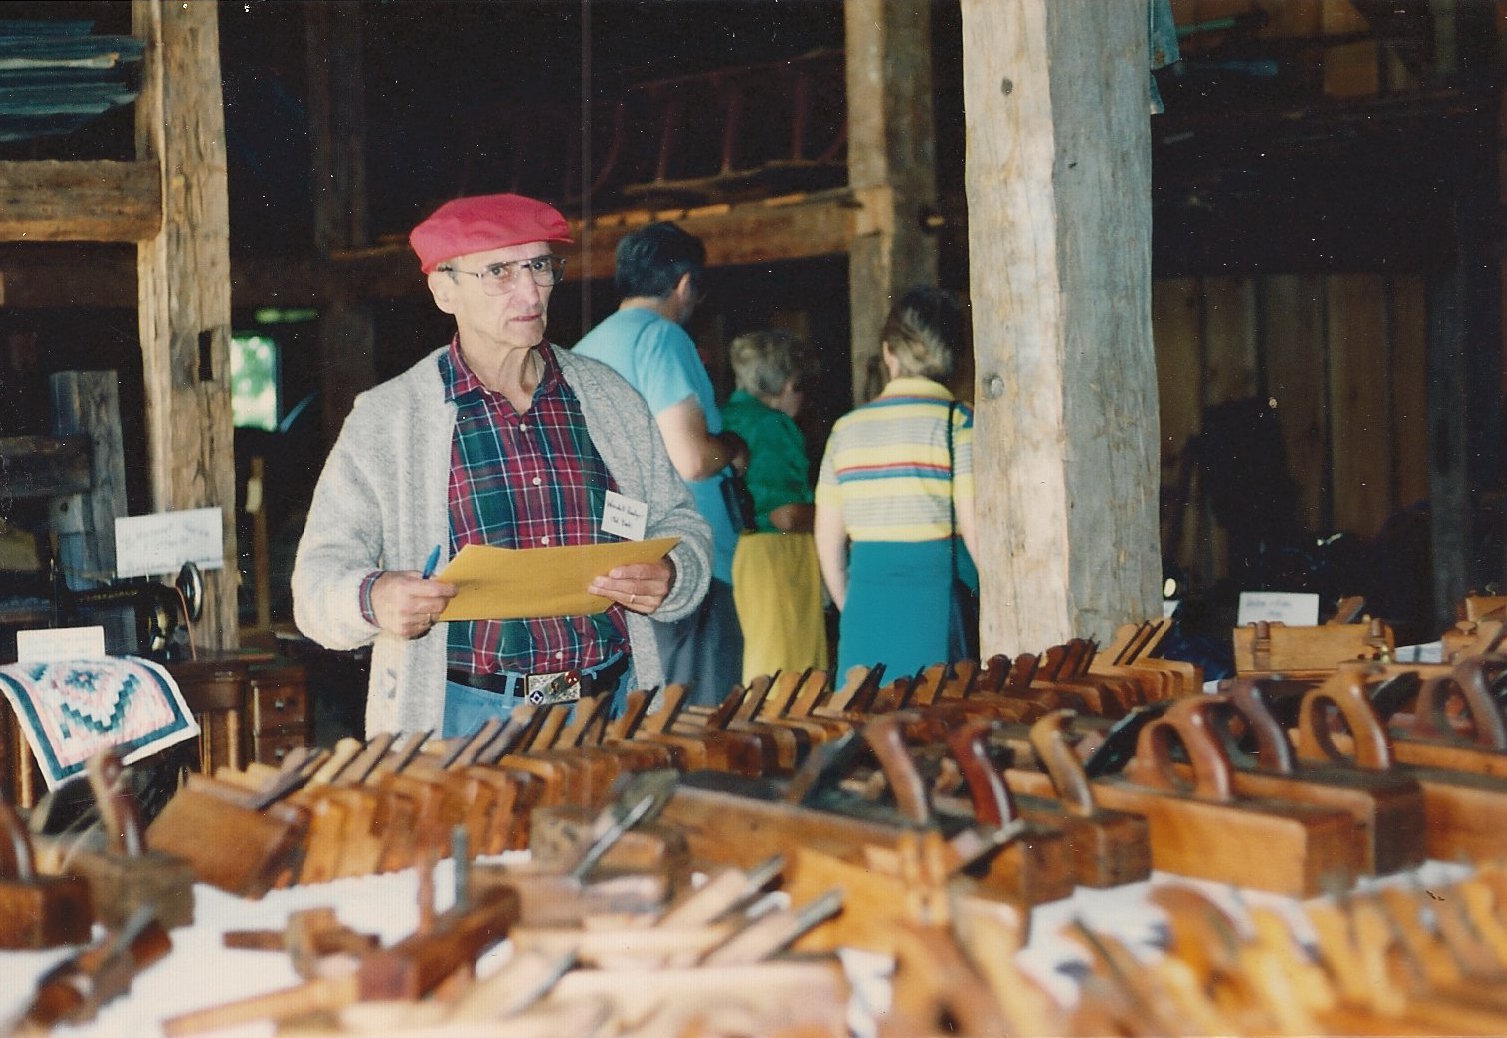 Wendall at a plane tool exhibition in his later years